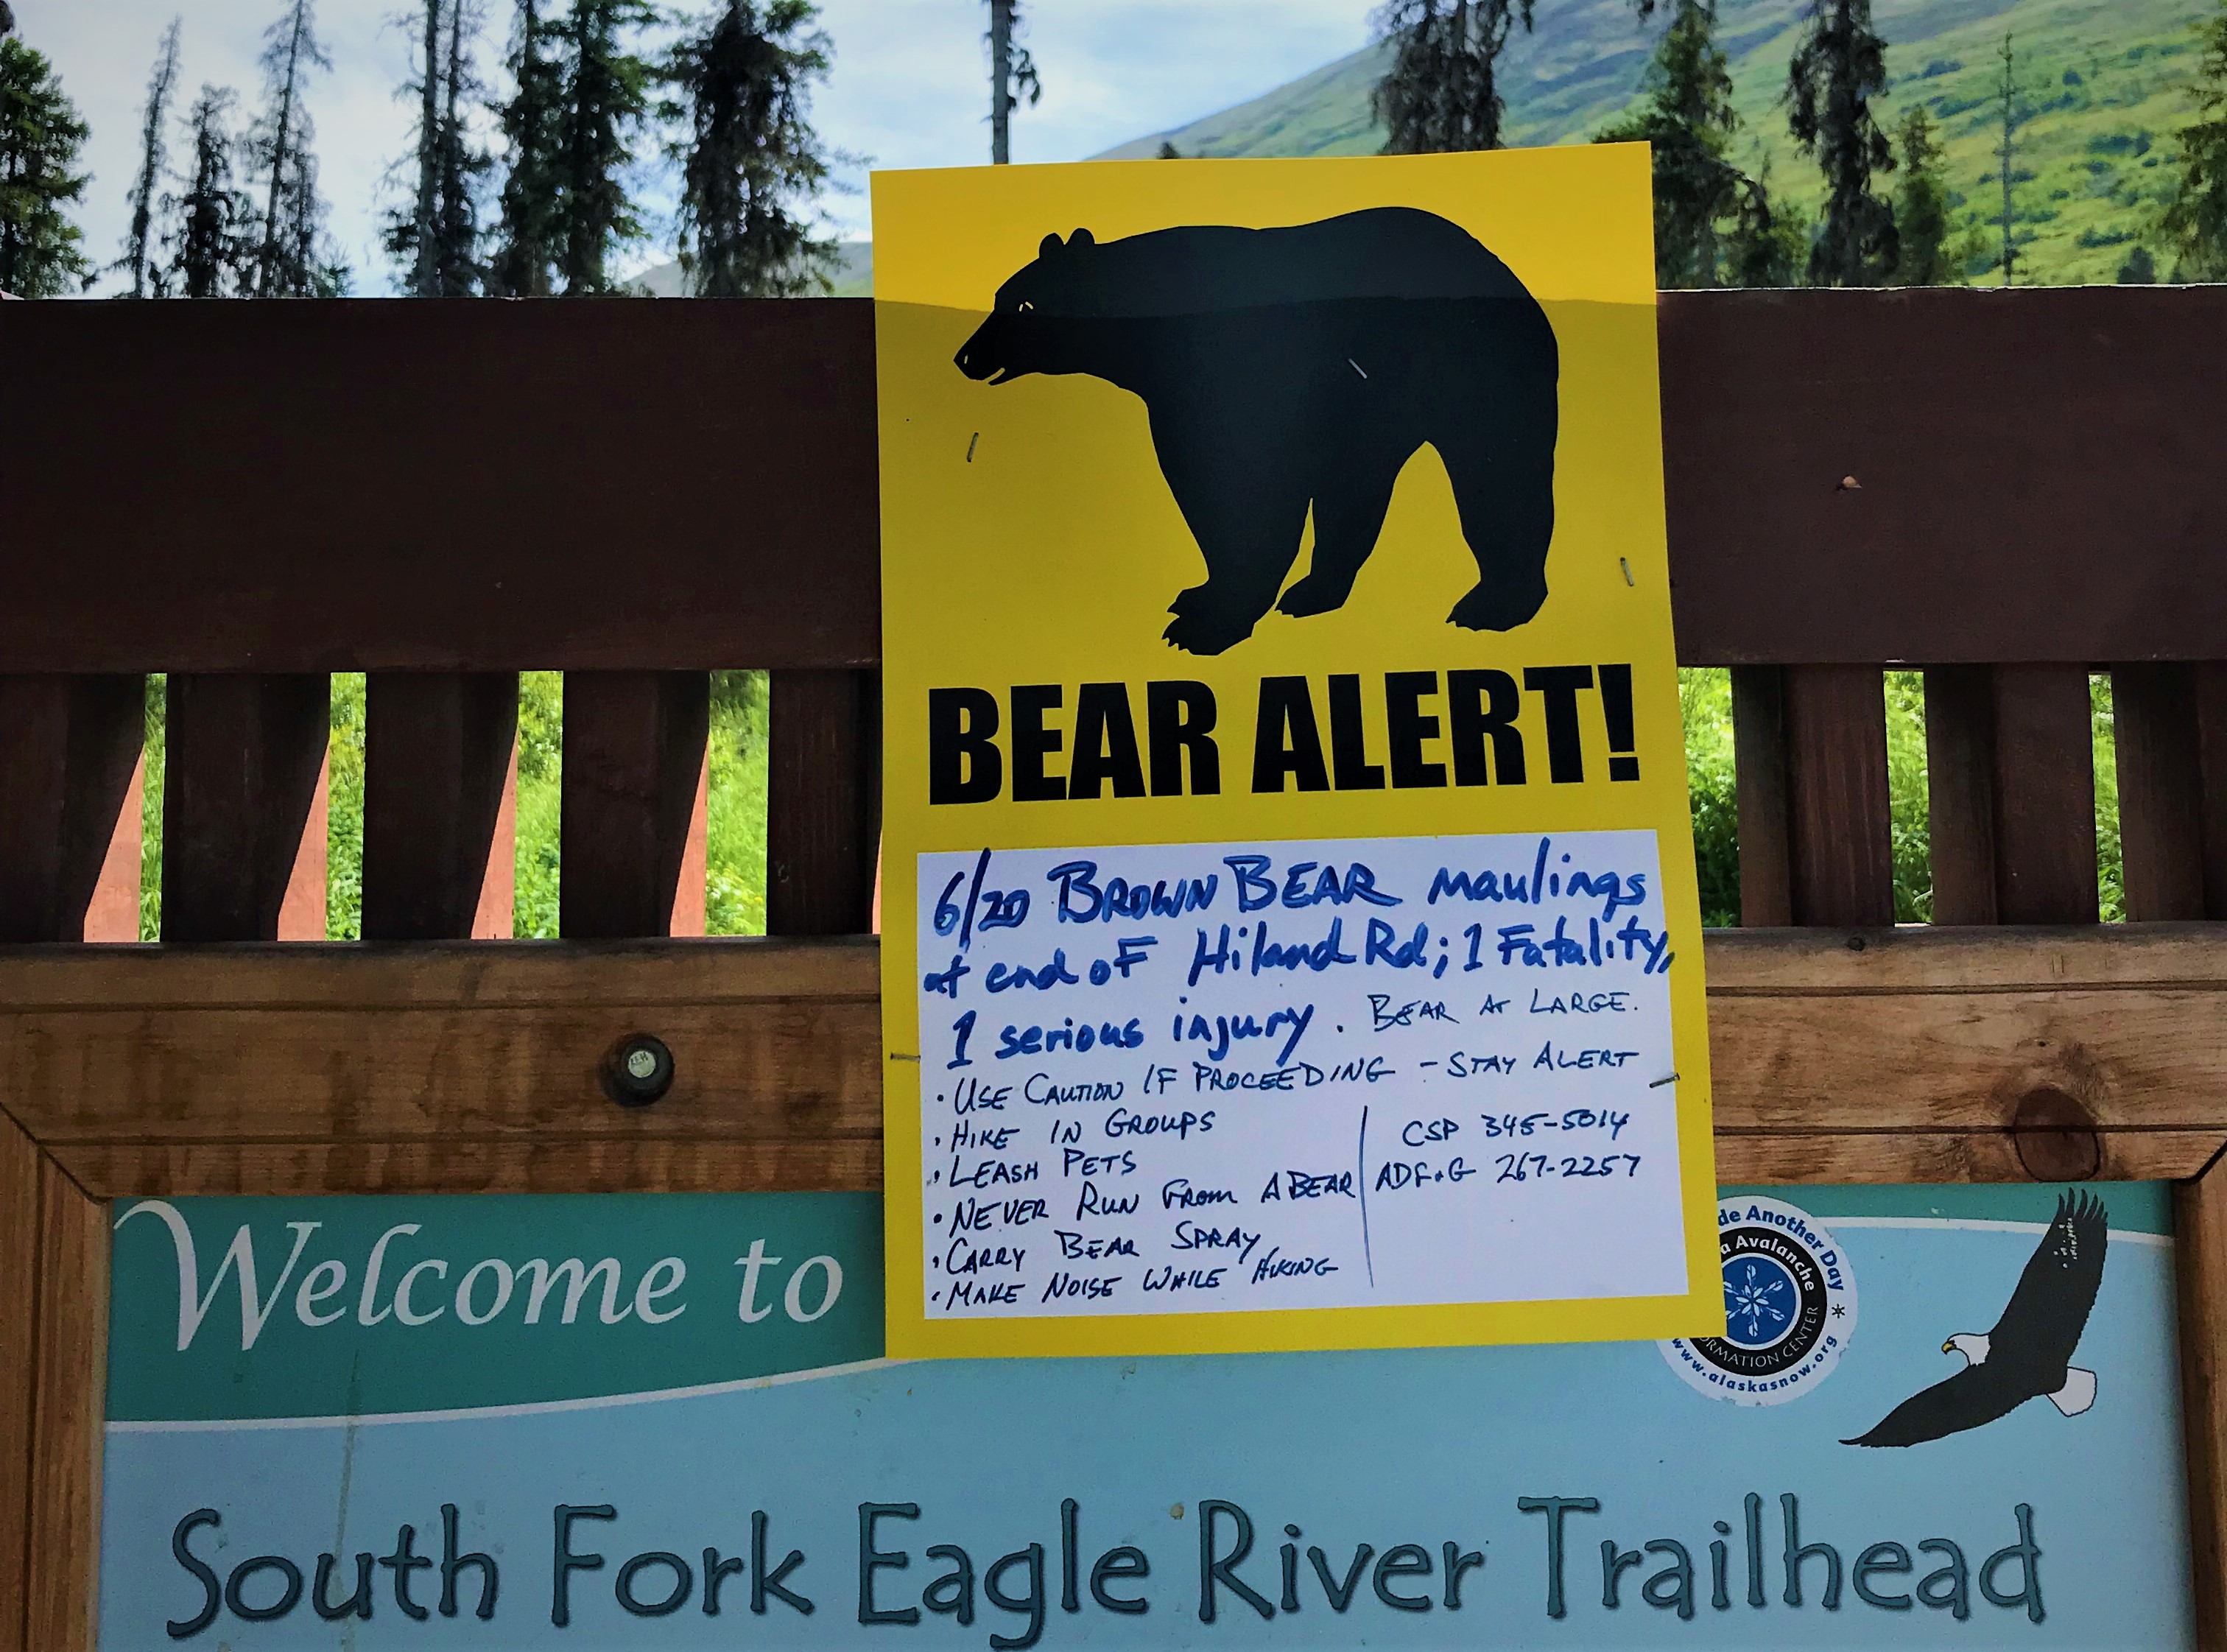 The Parks Department closed the South Fork Trail in Eagle River for a few weeks, but reopened it in late July. (Photo by Emily Russell/Alaska Public Media)